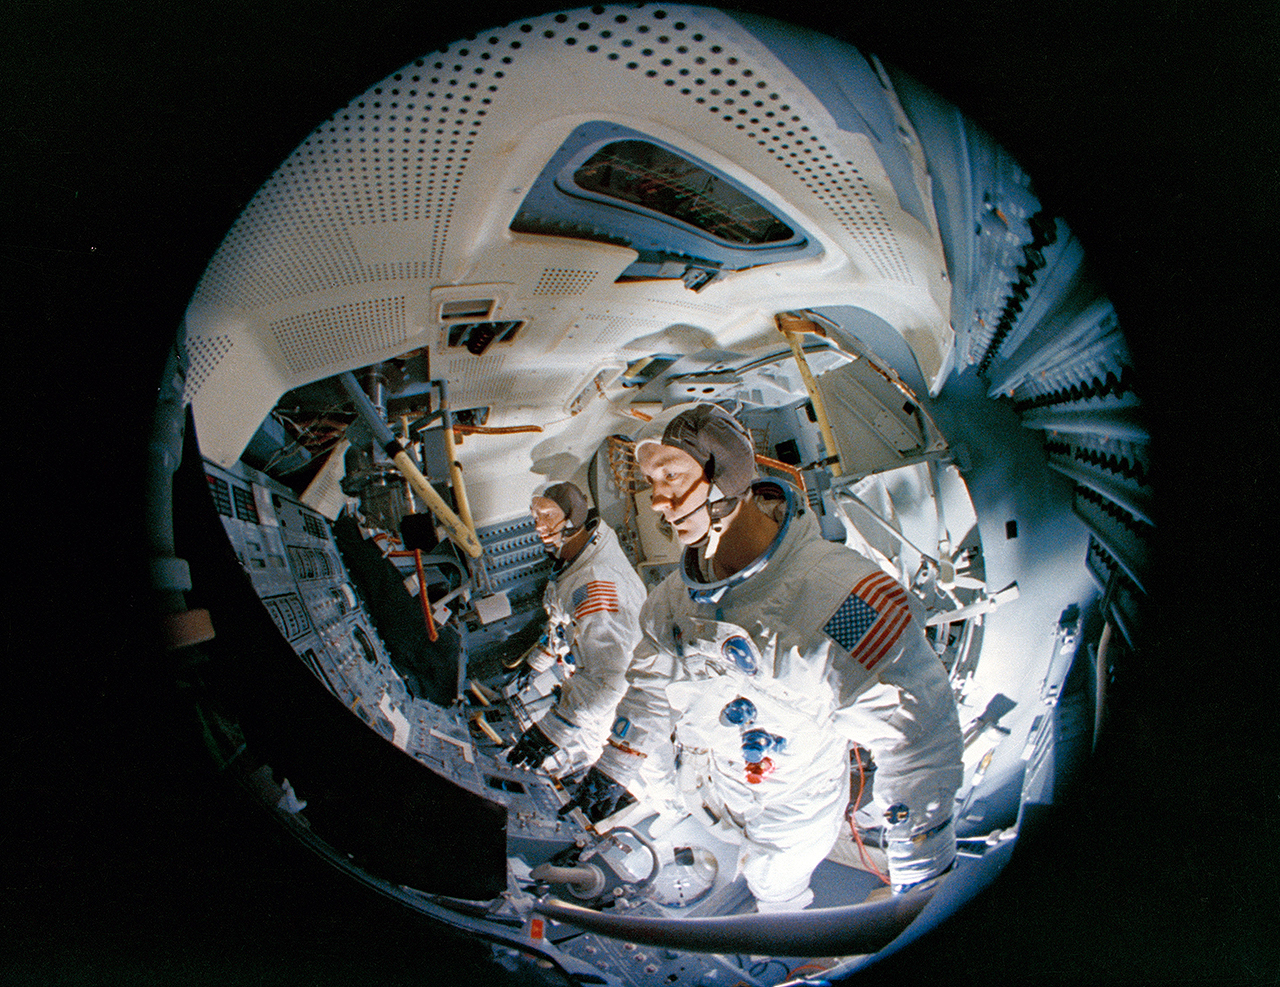 Fish-eye camera lens view of Apollo 9 commander Jim McDivitt (in the foreground) and Rusty Schweickart in the the Apollo Lunar Module Mission Simulator at the Kennedy Space Center.